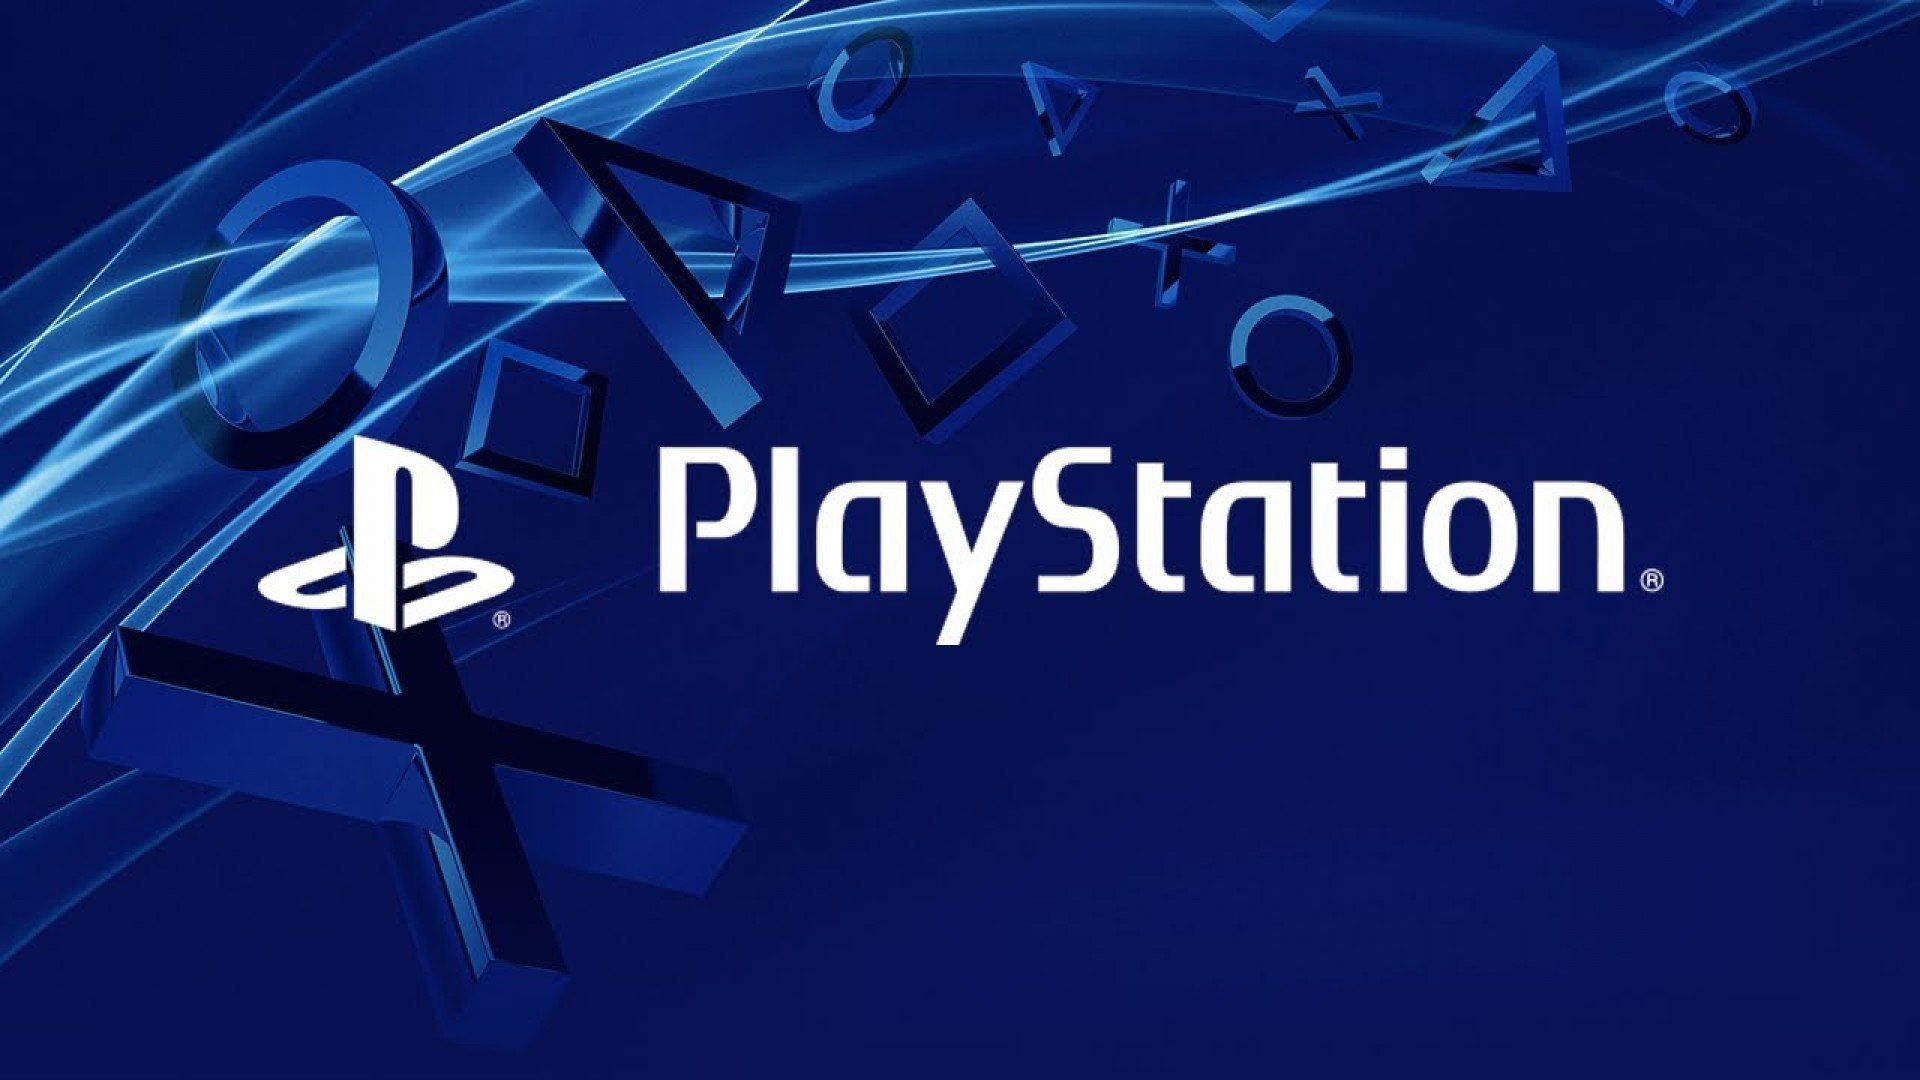 The PlayStation: A global leader in interactive and digital entertainment, SIE. 1920x1080 Full HD Background.